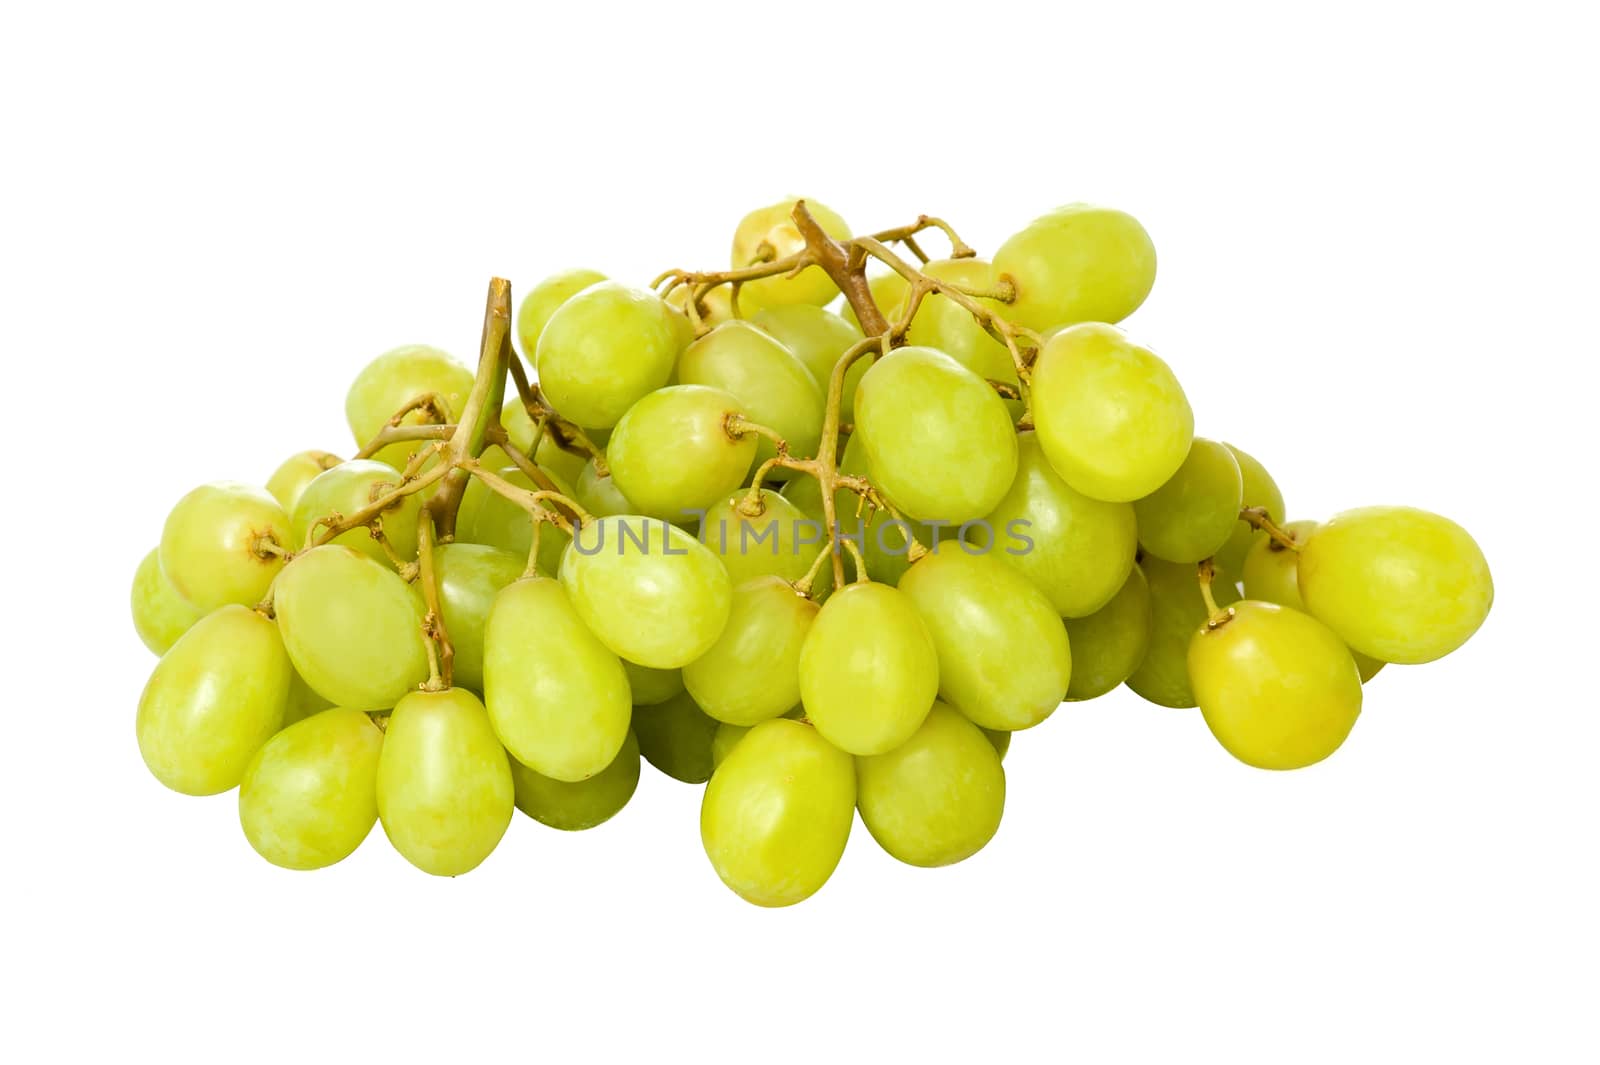 Bunch of fresh green grapes isolated against white